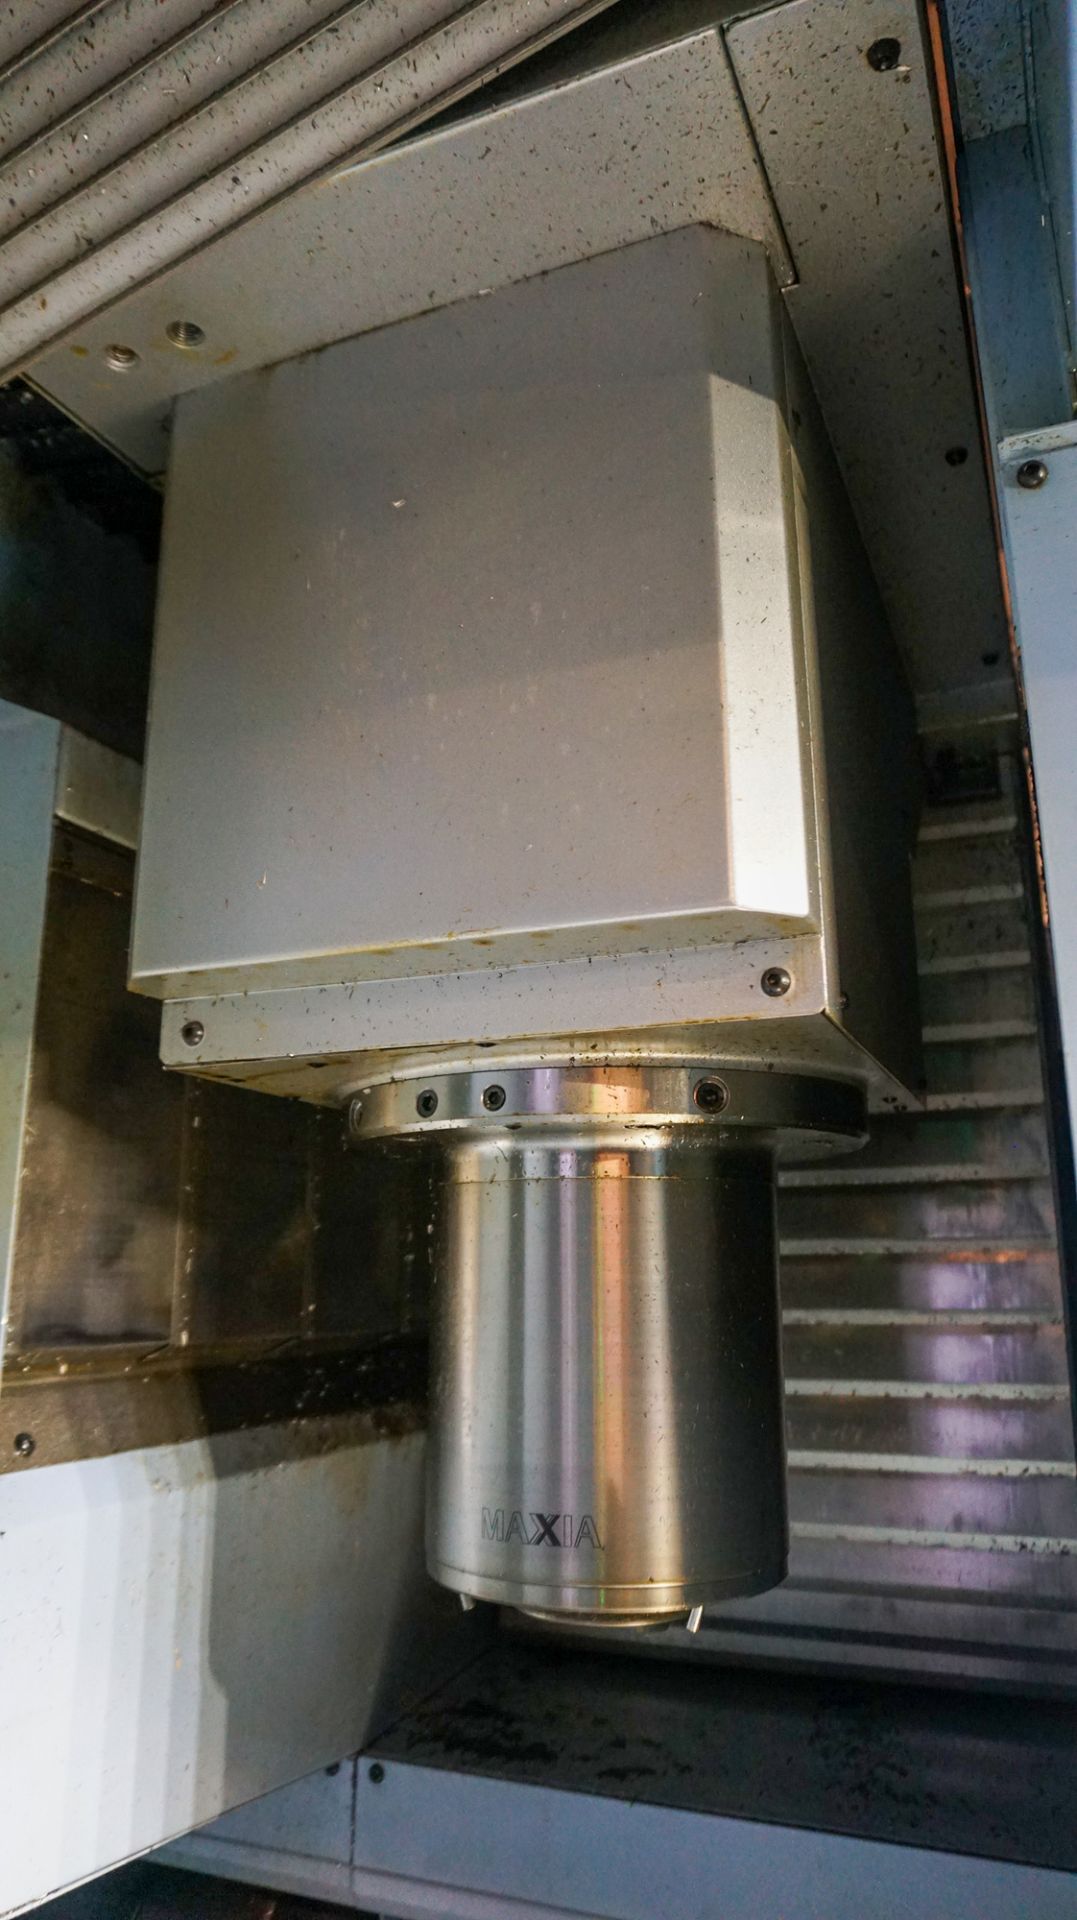 MATSUURA (2014) (INSTALLED NEW IN 2015) MX-520 5 AXIS CNC VERTICAL MACHINING CENTER WITH MATSUURA - Image 6 of 25